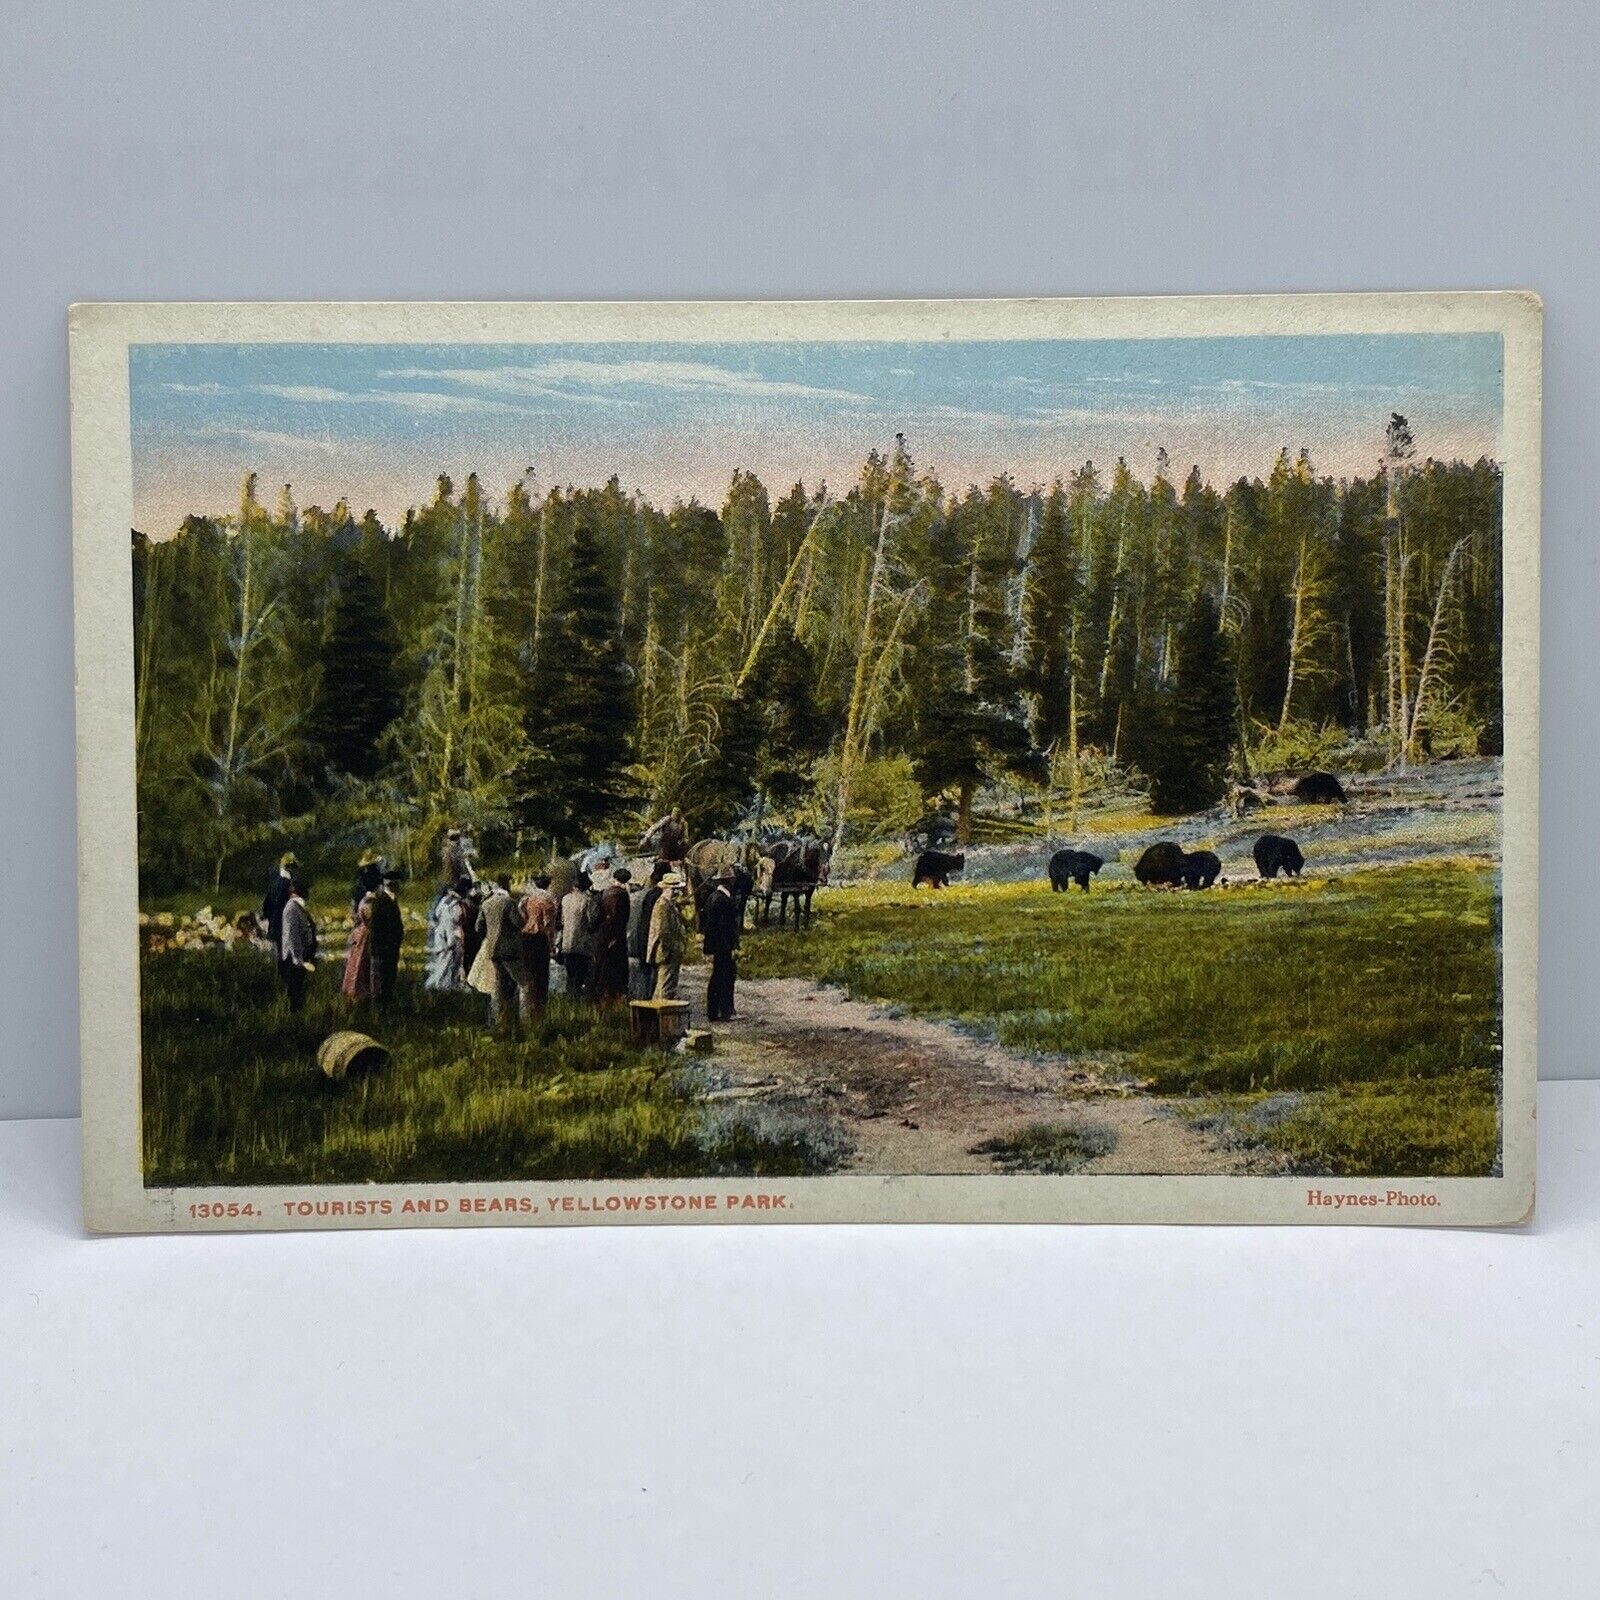 Yellowstone National Park Sightseeing Tourists And Bears Series 13054 Postcard